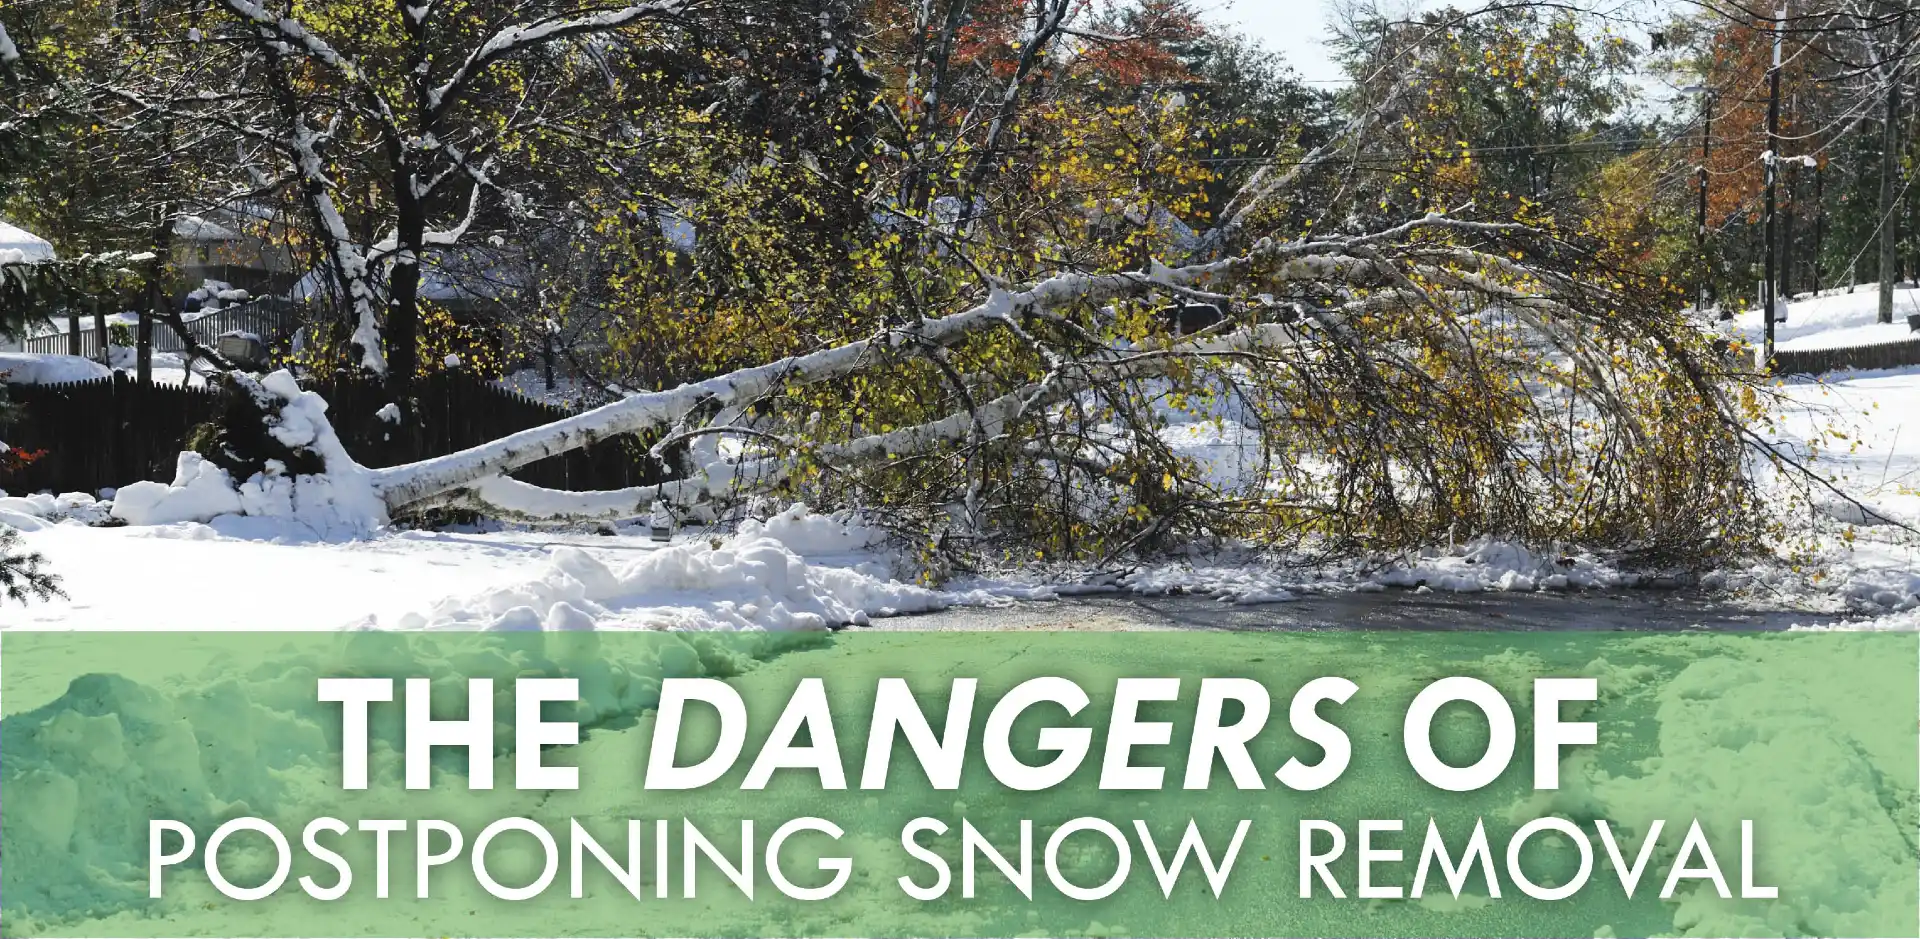 Fallen tree and snow with text-The dangers of postponing snow removal